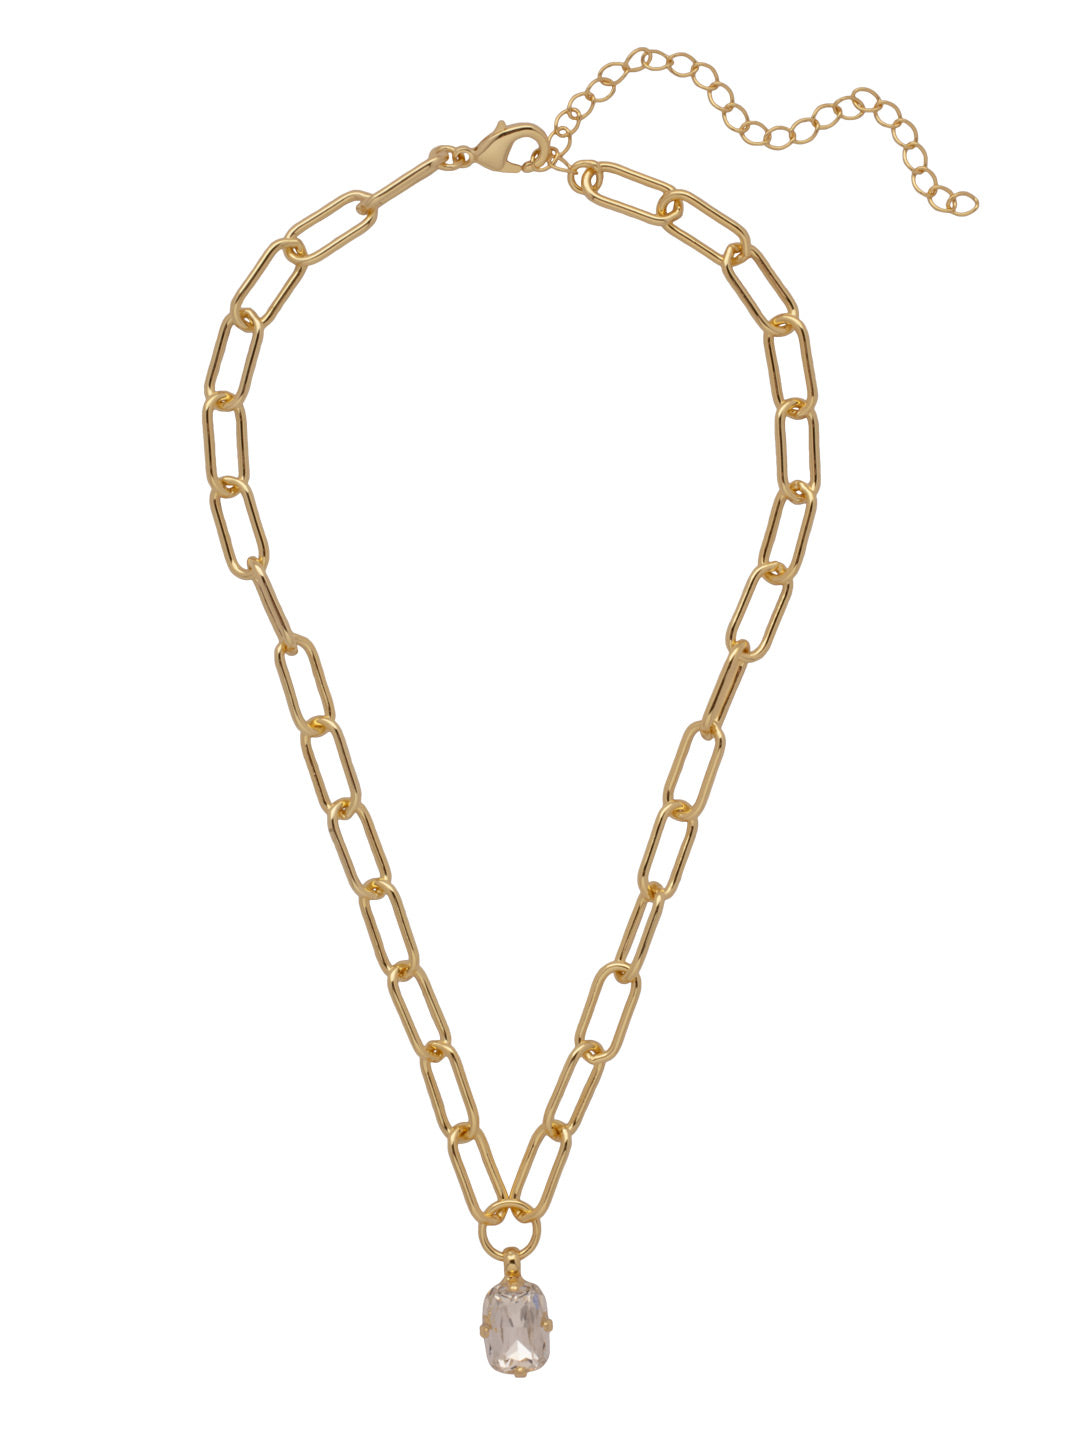 Nia Pendant Necklace - 4NFJ18BGCRY - <p>The Nia Pendant Necklace features a rounded octagon cut pendant on an adjustable large chunky paperclip chain, secured with a lobster claw clasp. From Sorrelli's Crystal collection in our Bright Gold-tone finish.</p>